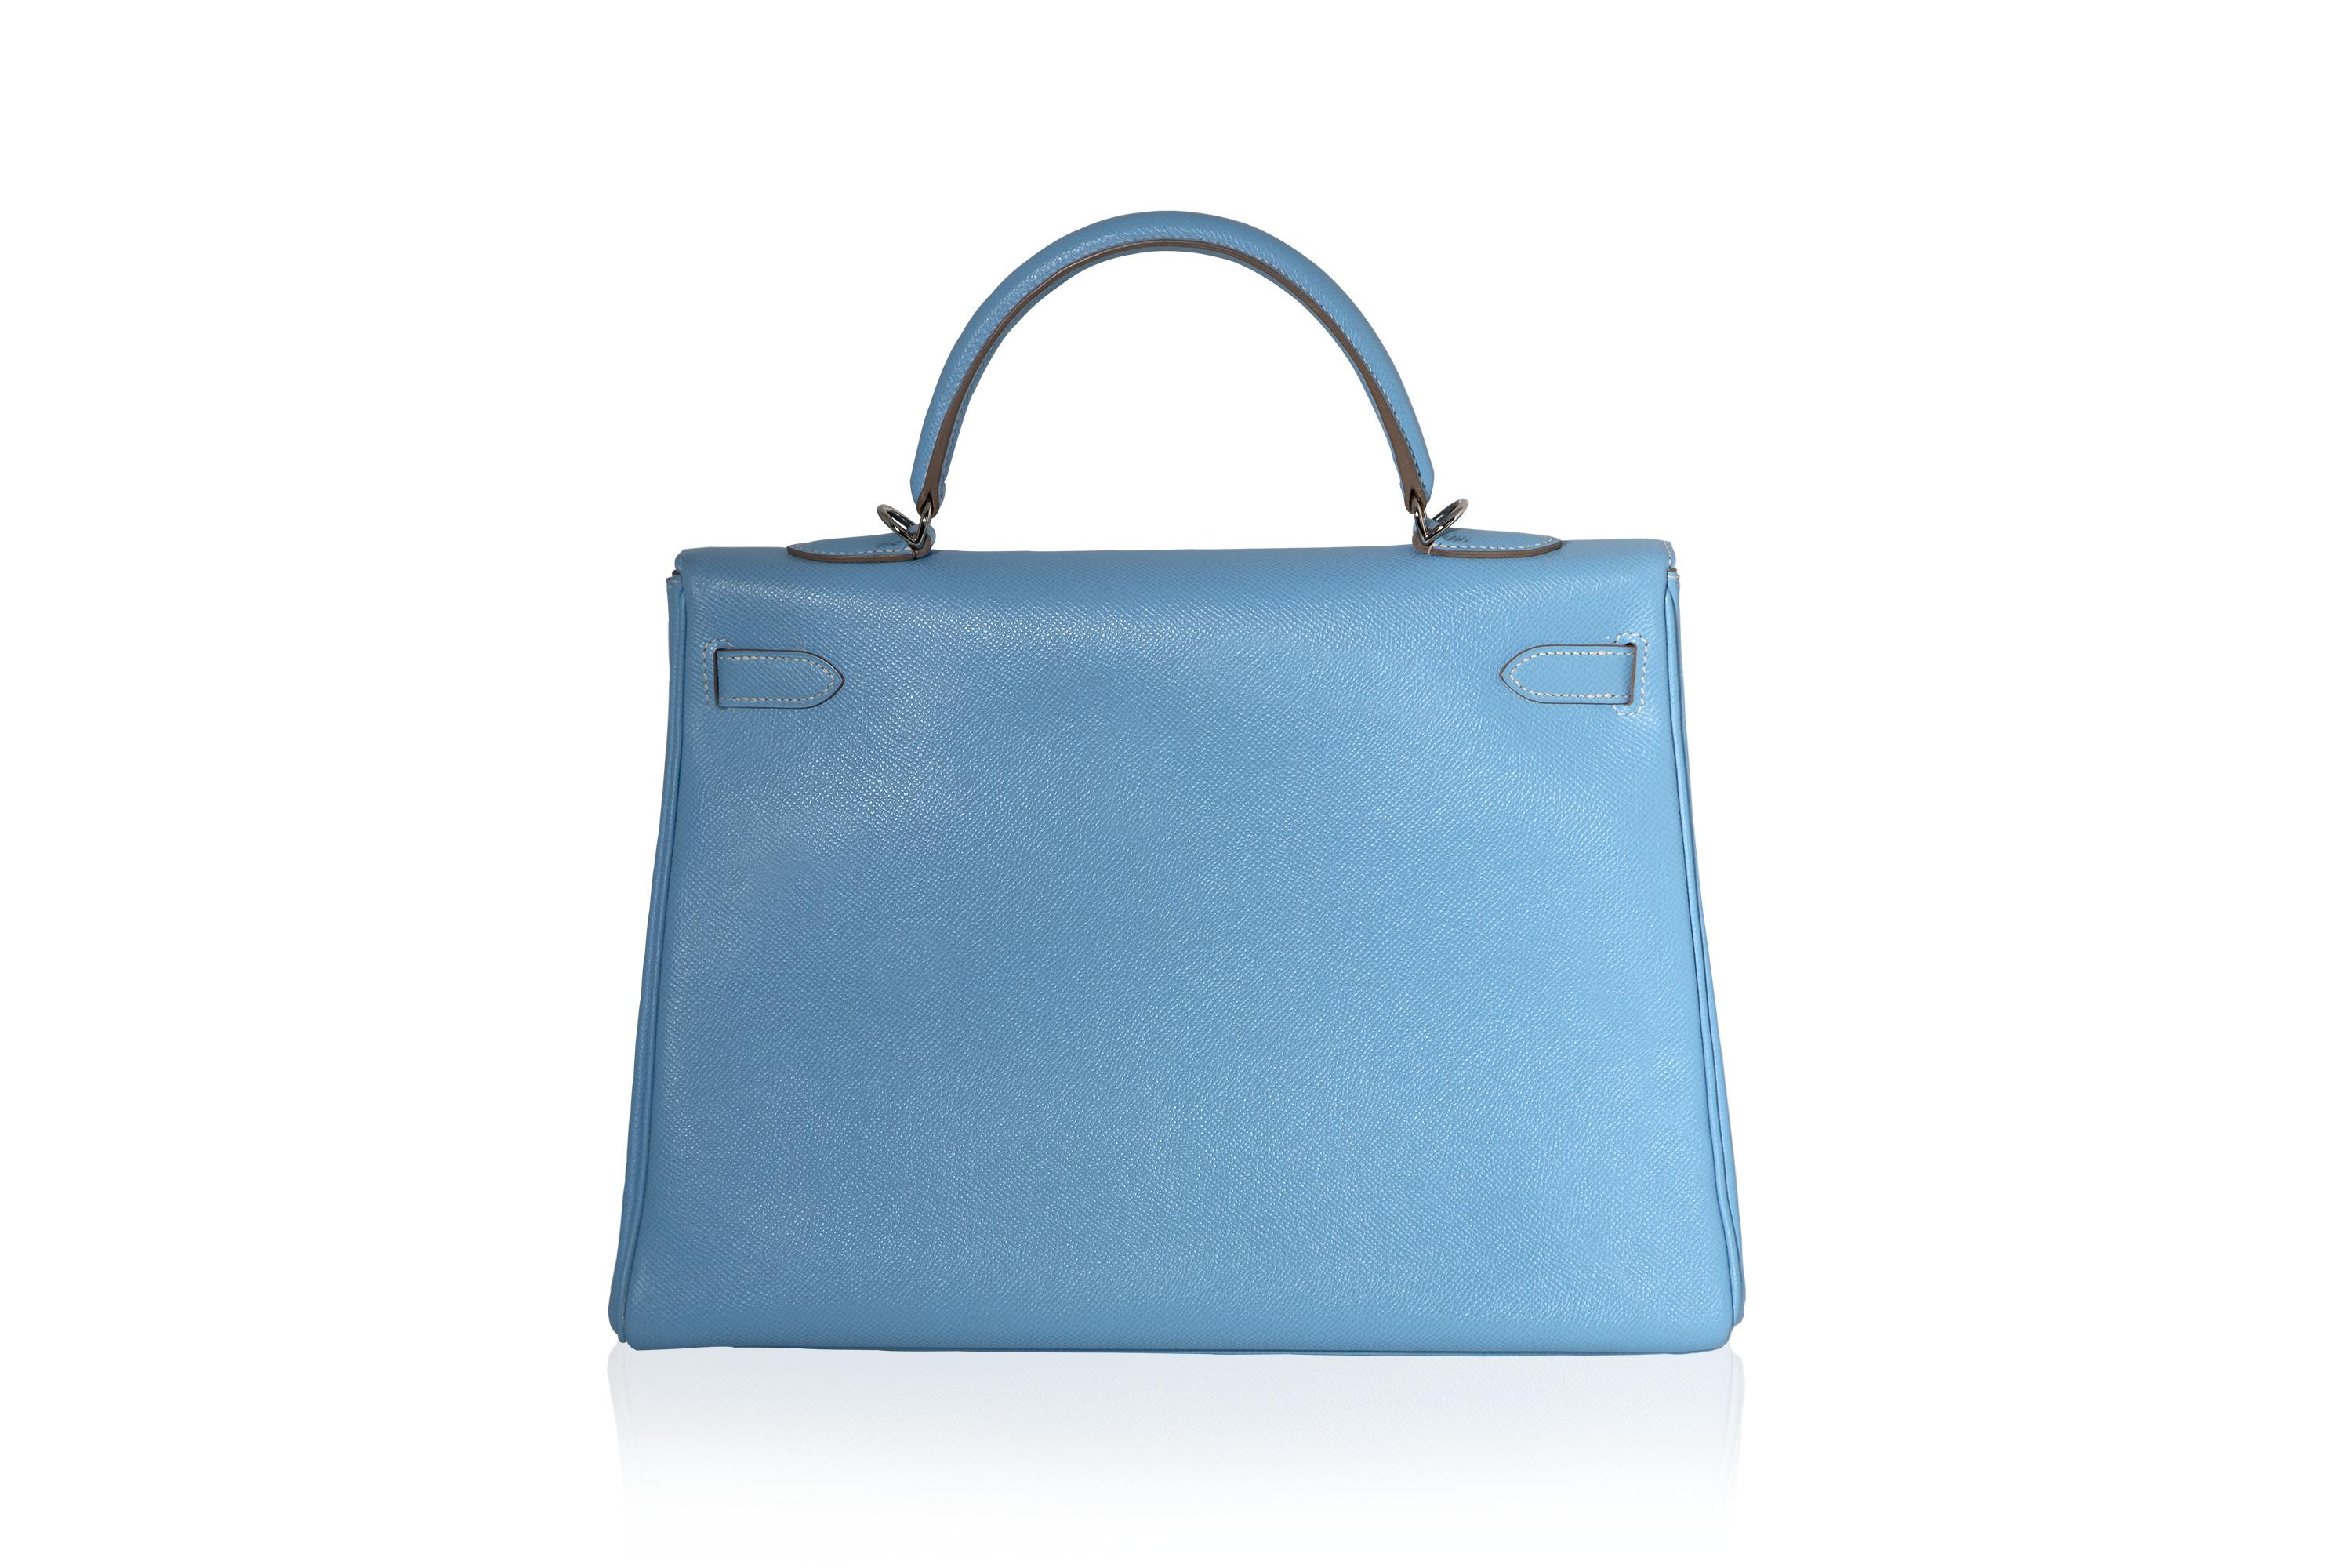 Hermès 35 Celeste Blue Epsom Leather PHW In Excellent Condition For Sale In London, GB